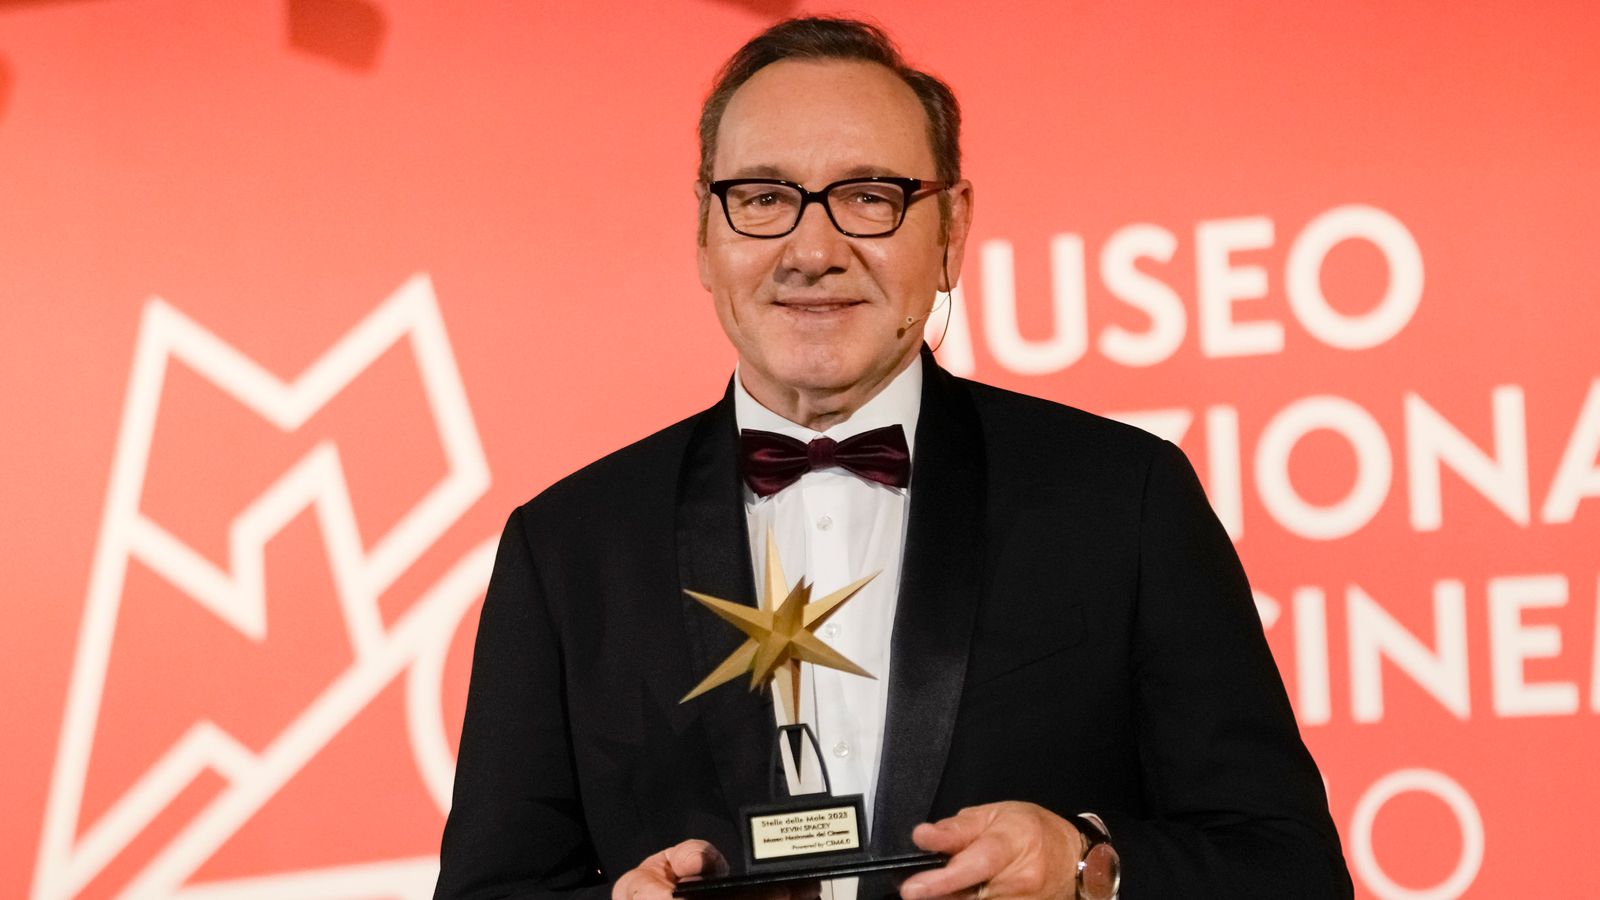 Kevin Spacey picks up lifetime achievement award in Italy - days after UK court appearance